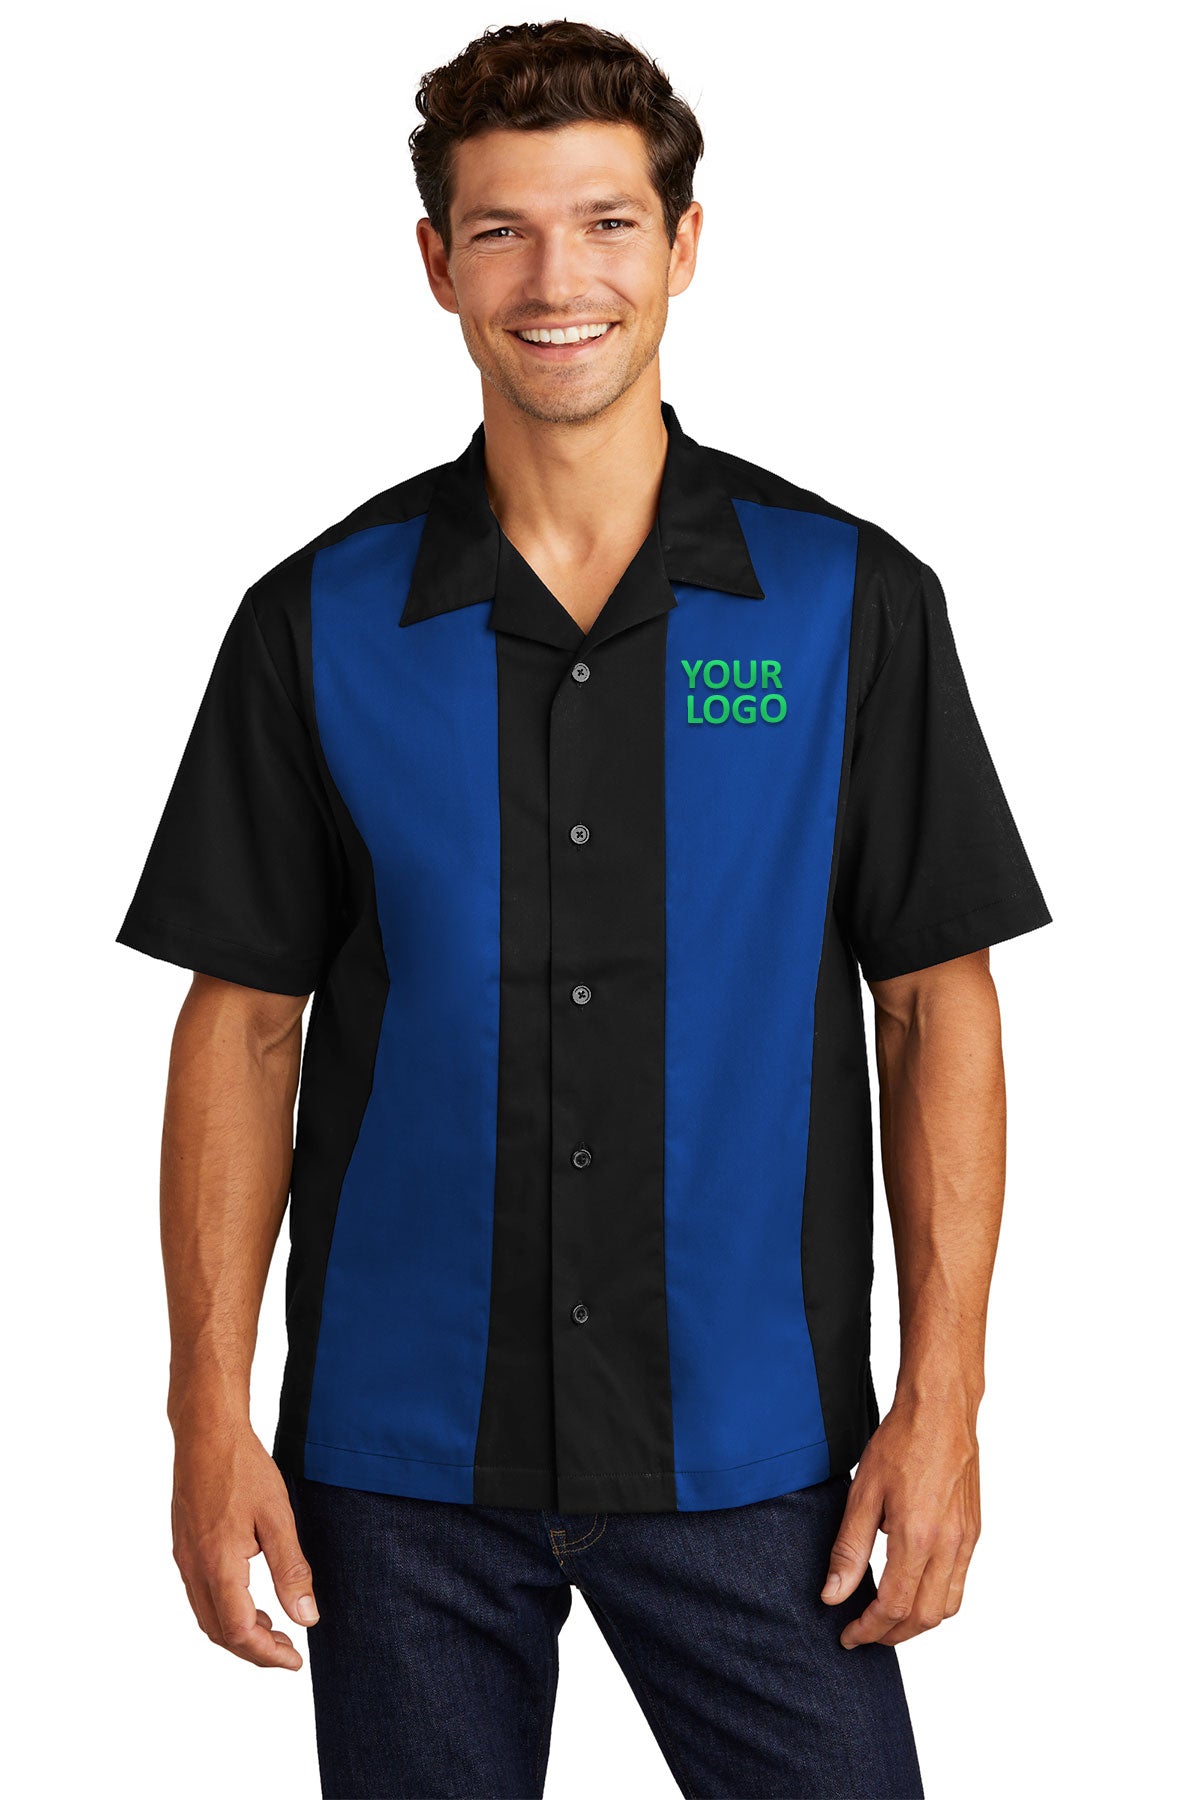 Port Authority Black/Royal S300 work shirts with logo